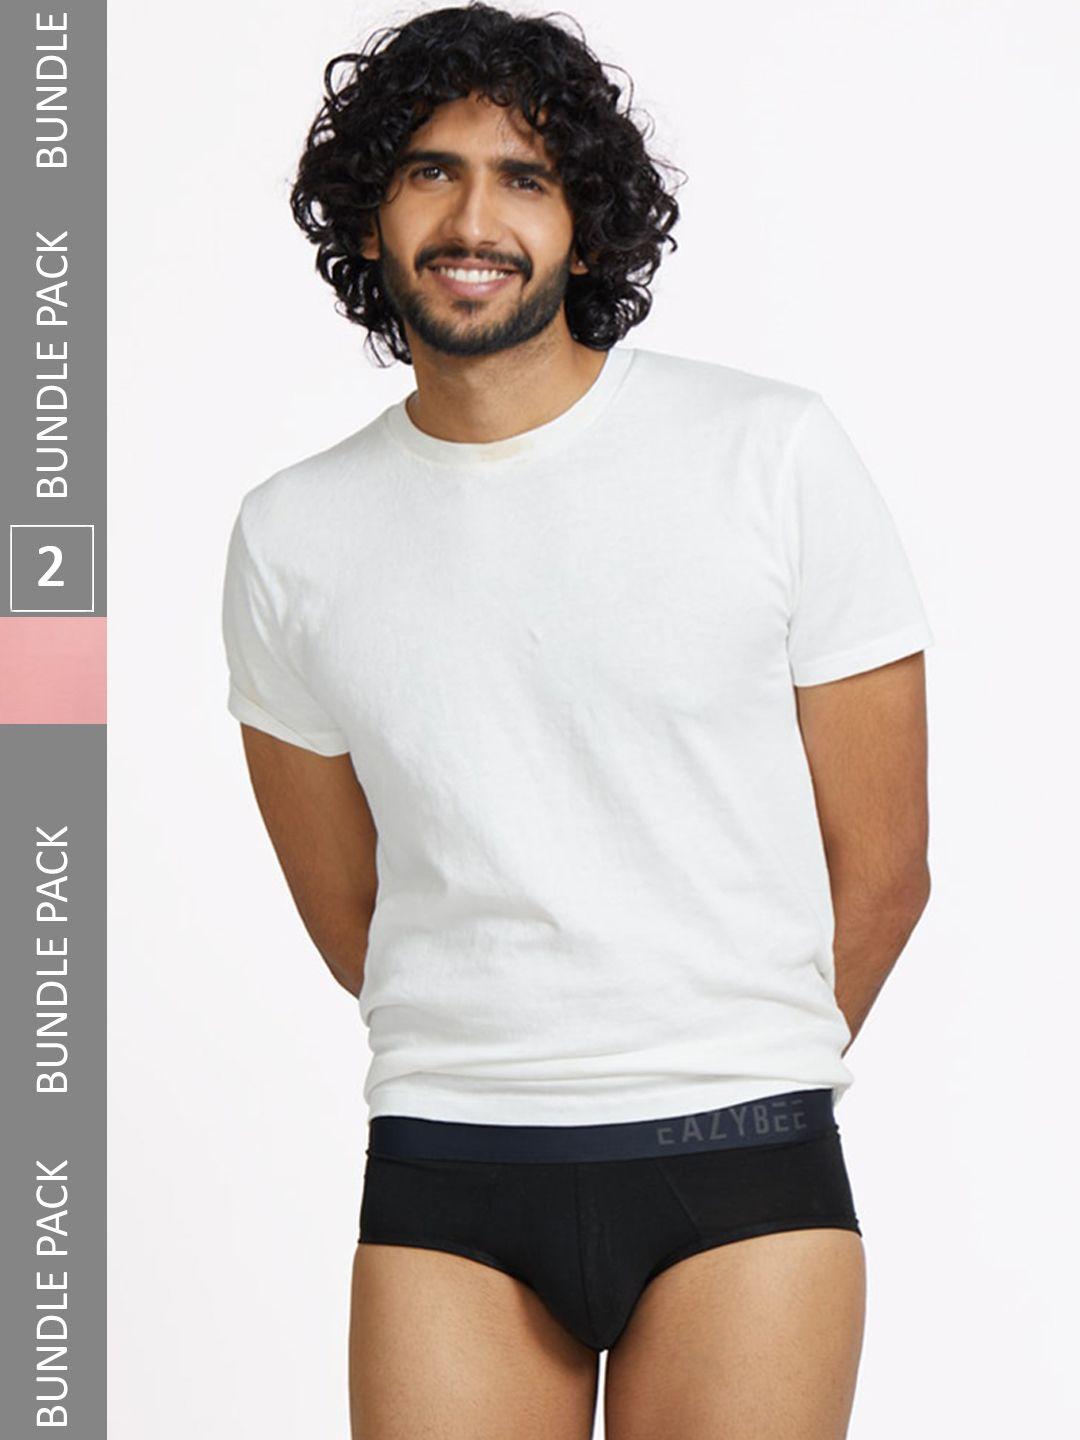 eazybee-men-pack-of-2-eco-super-soft-anti-odour-basic-briefs